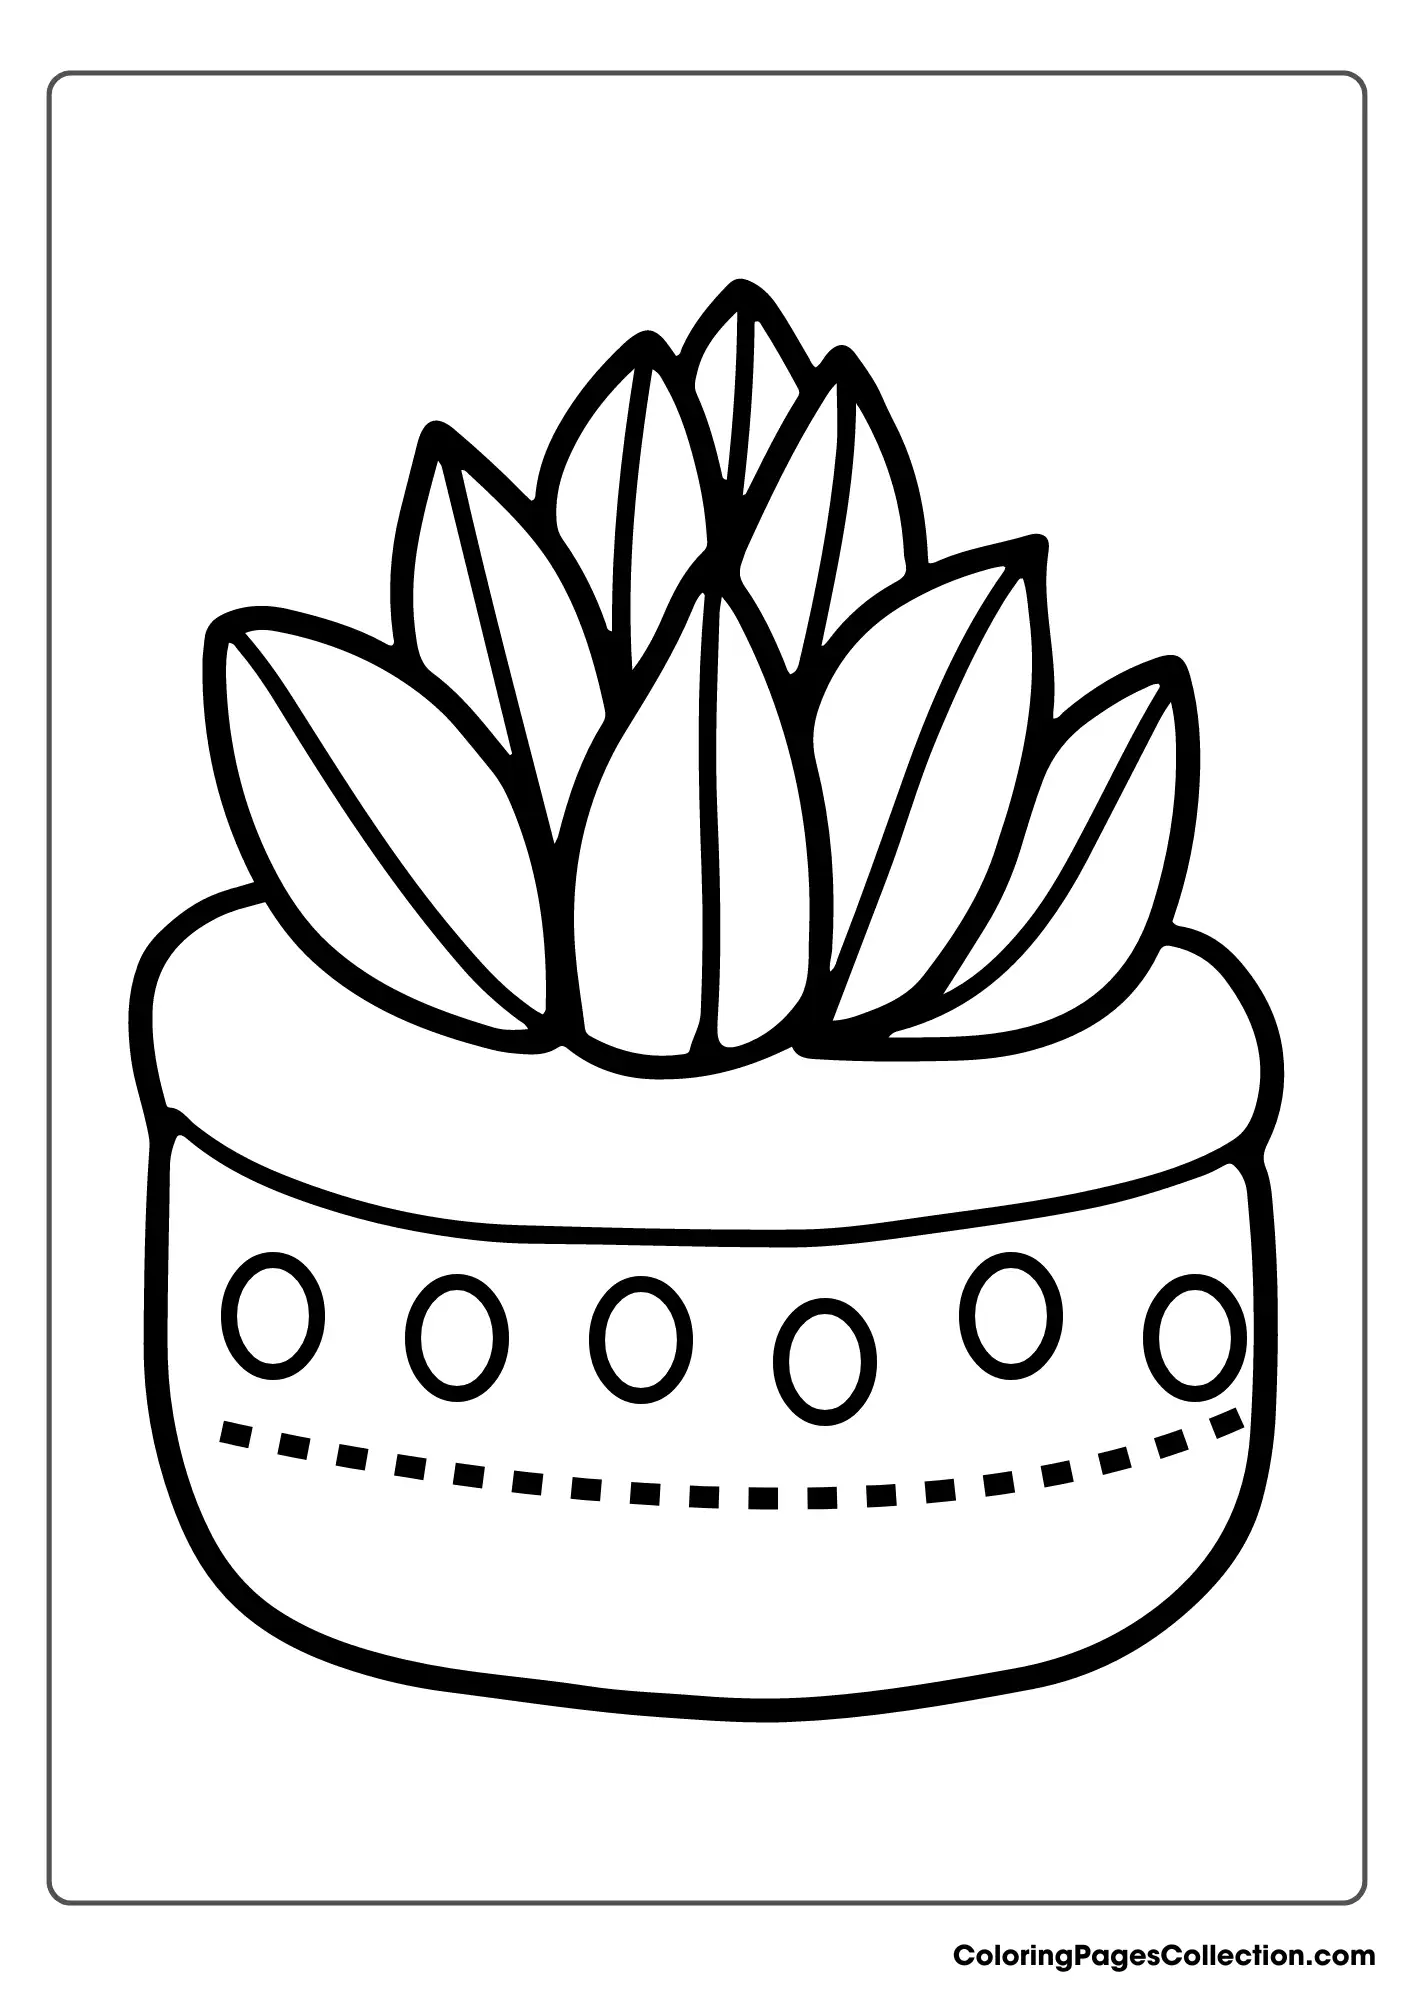 A Coloring Page Of A Plant In A Pot